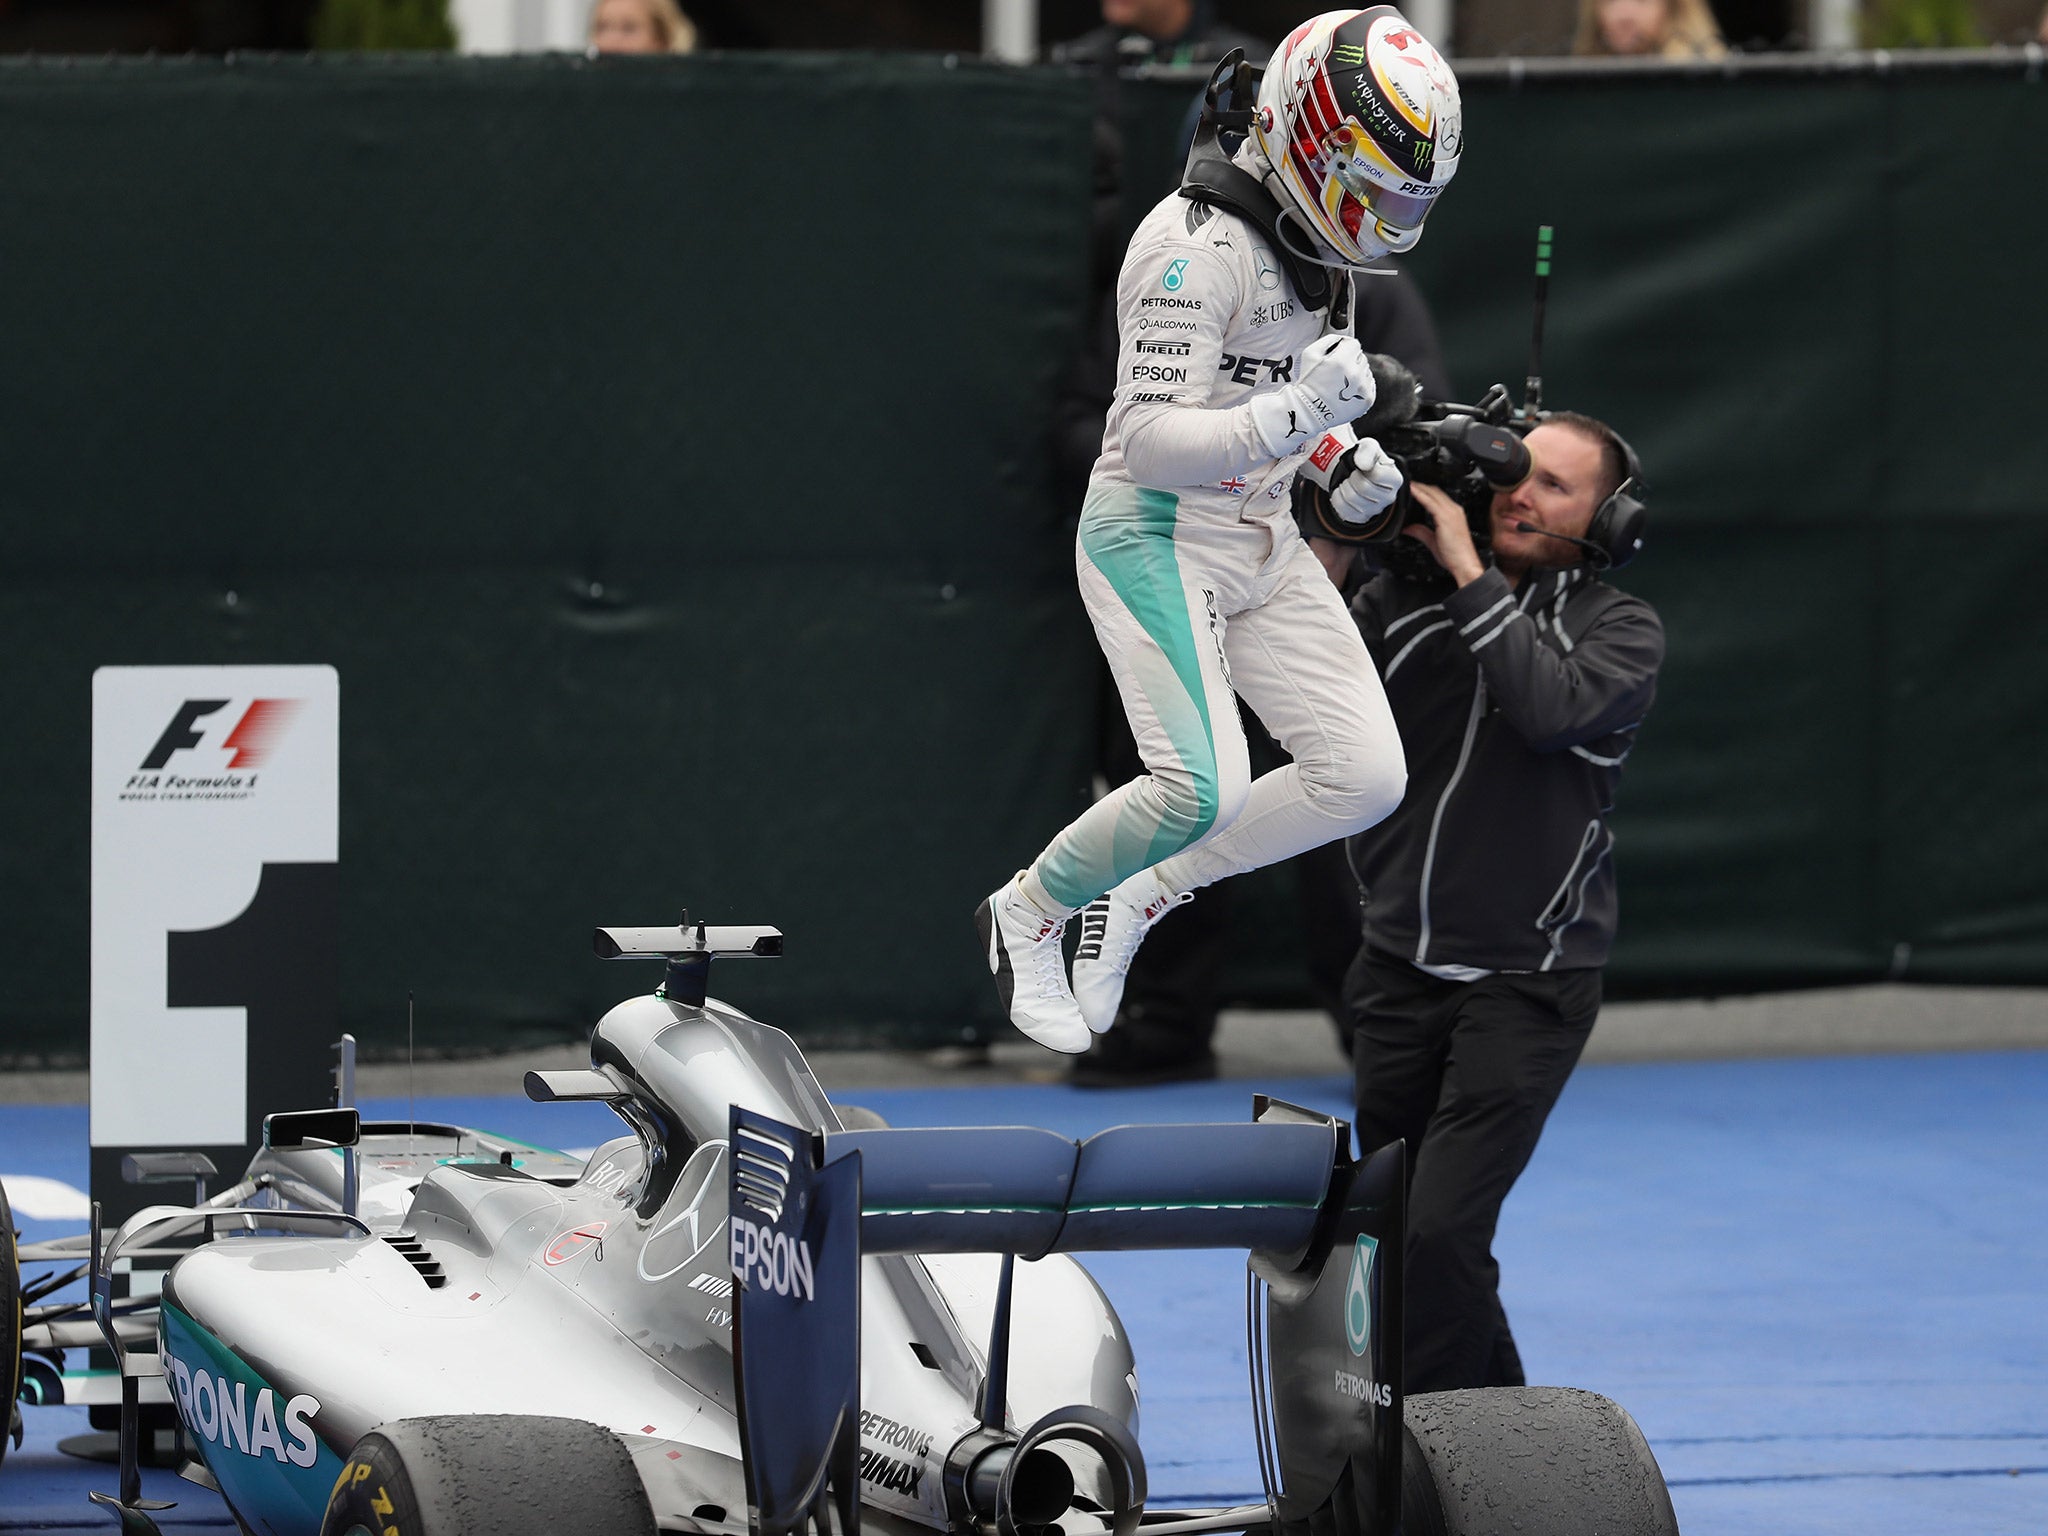 &#13;
Hamilton leaps off his Mercedes in celebration after winning in Canada &#13;